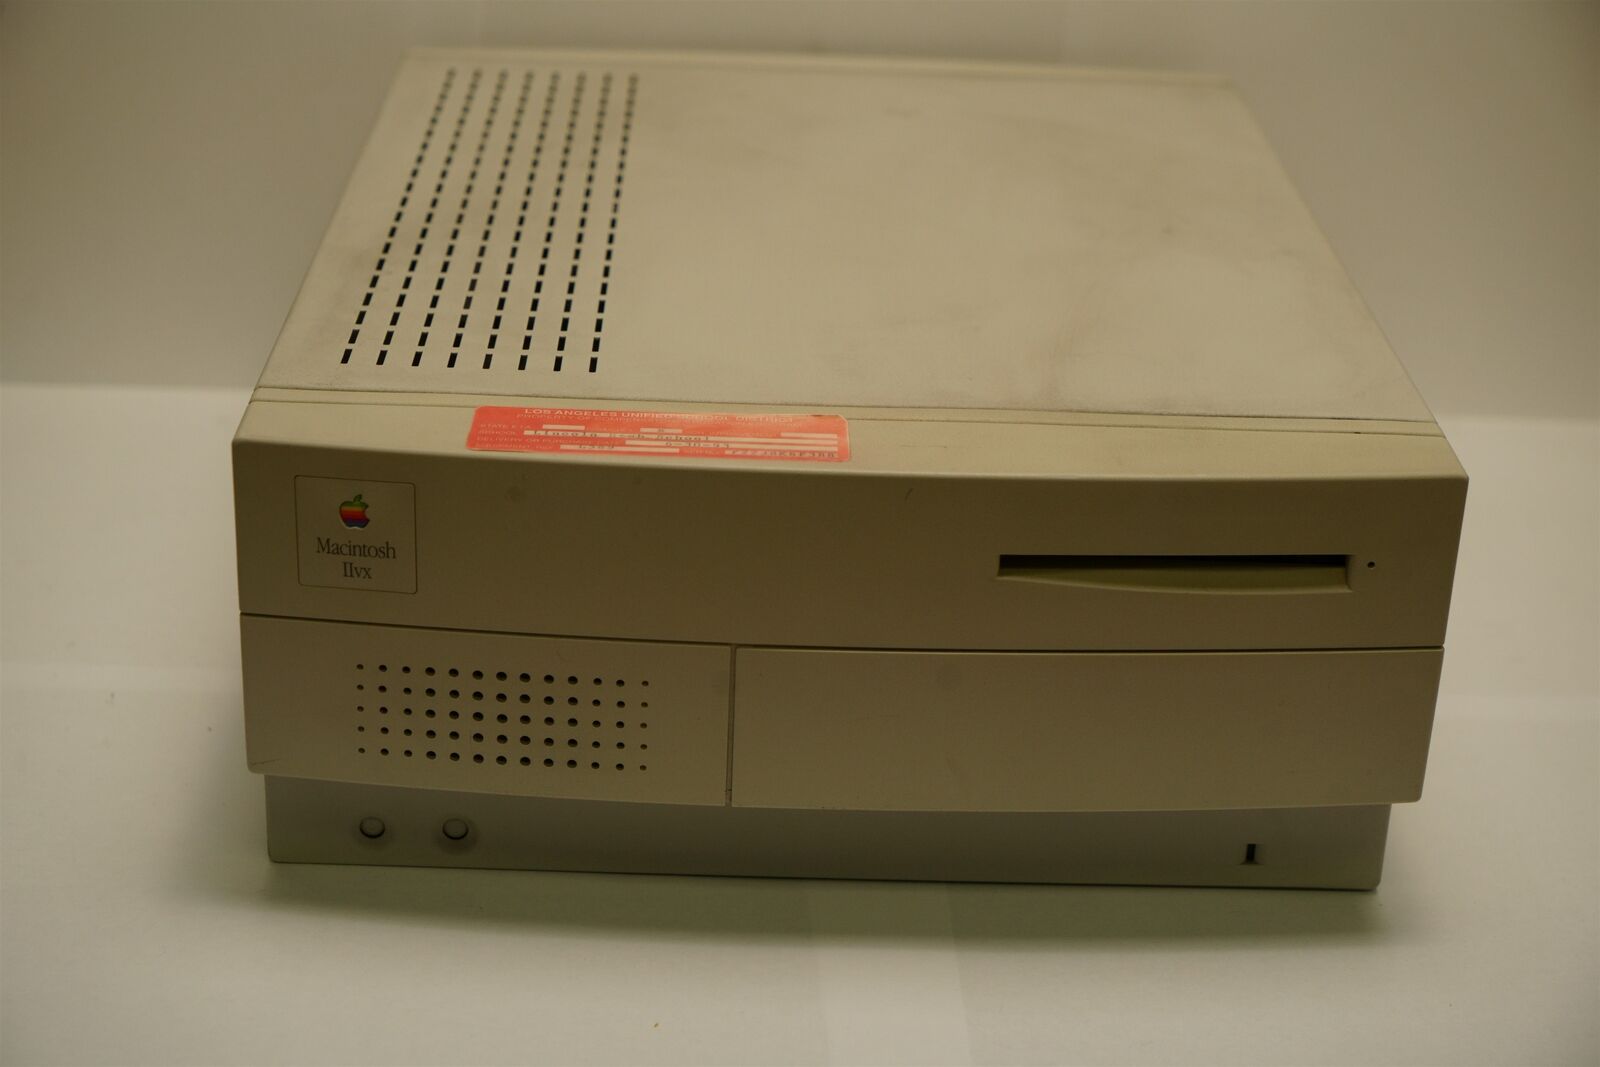 Apple Macintosh IIvx M1350 - Tested & Running - No Hdd or OS